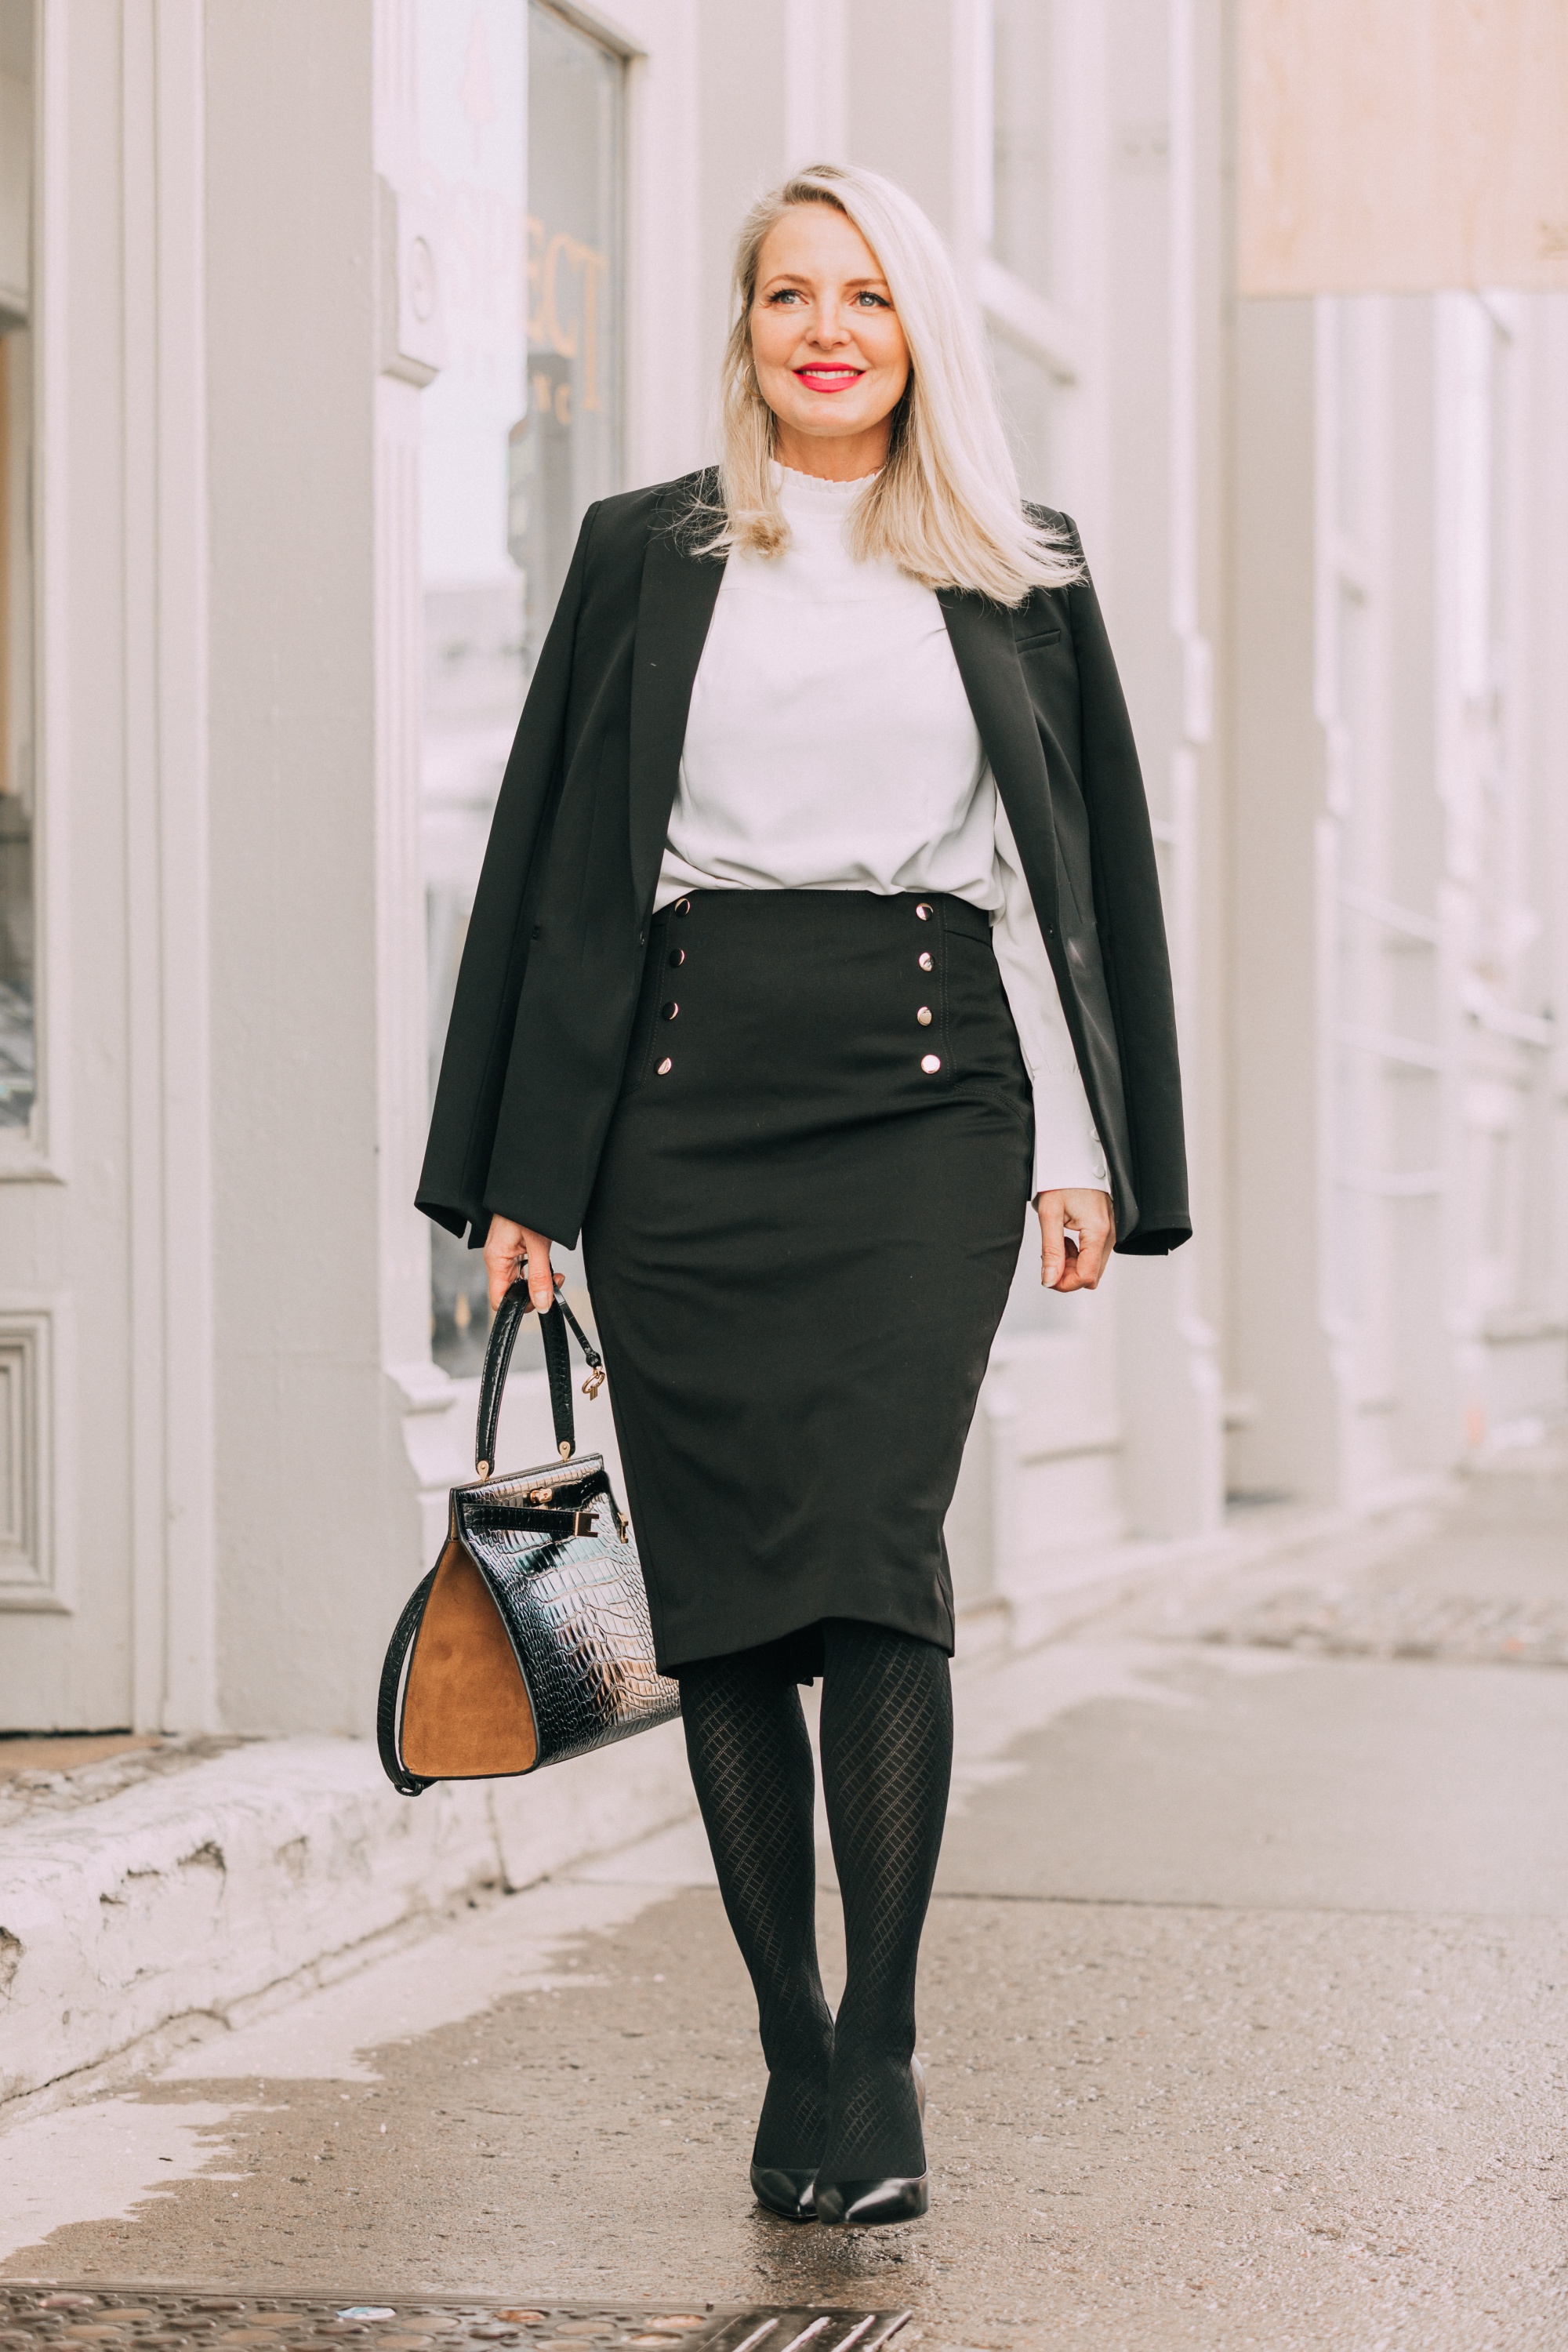 Wardrobe Basics, Fashion blogger Erin Busbee of BusbeeStyle.com sharing wardrobe basics from Ann Taylor wearing a black pencil skirt with sailir buttons, a white ruffle neck blouse, classic black blazer, black tights, and black pumps all from Ann Taylor in Telluride, Colorado